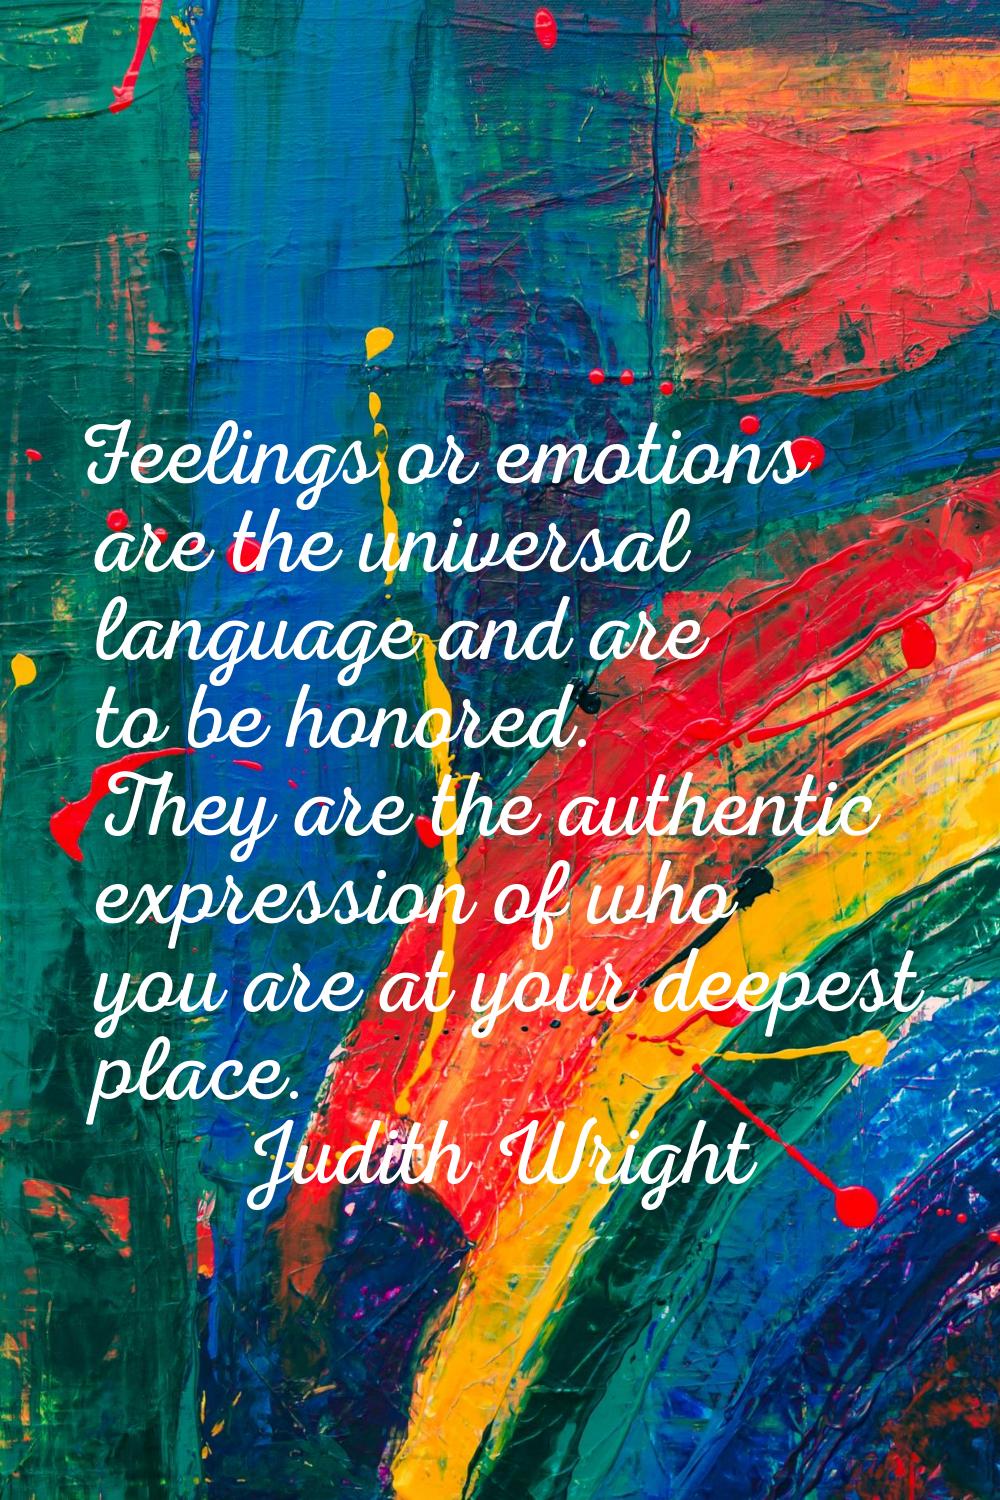 Feelings or emotions are the universal language and are to be honored. They are the authentic expre